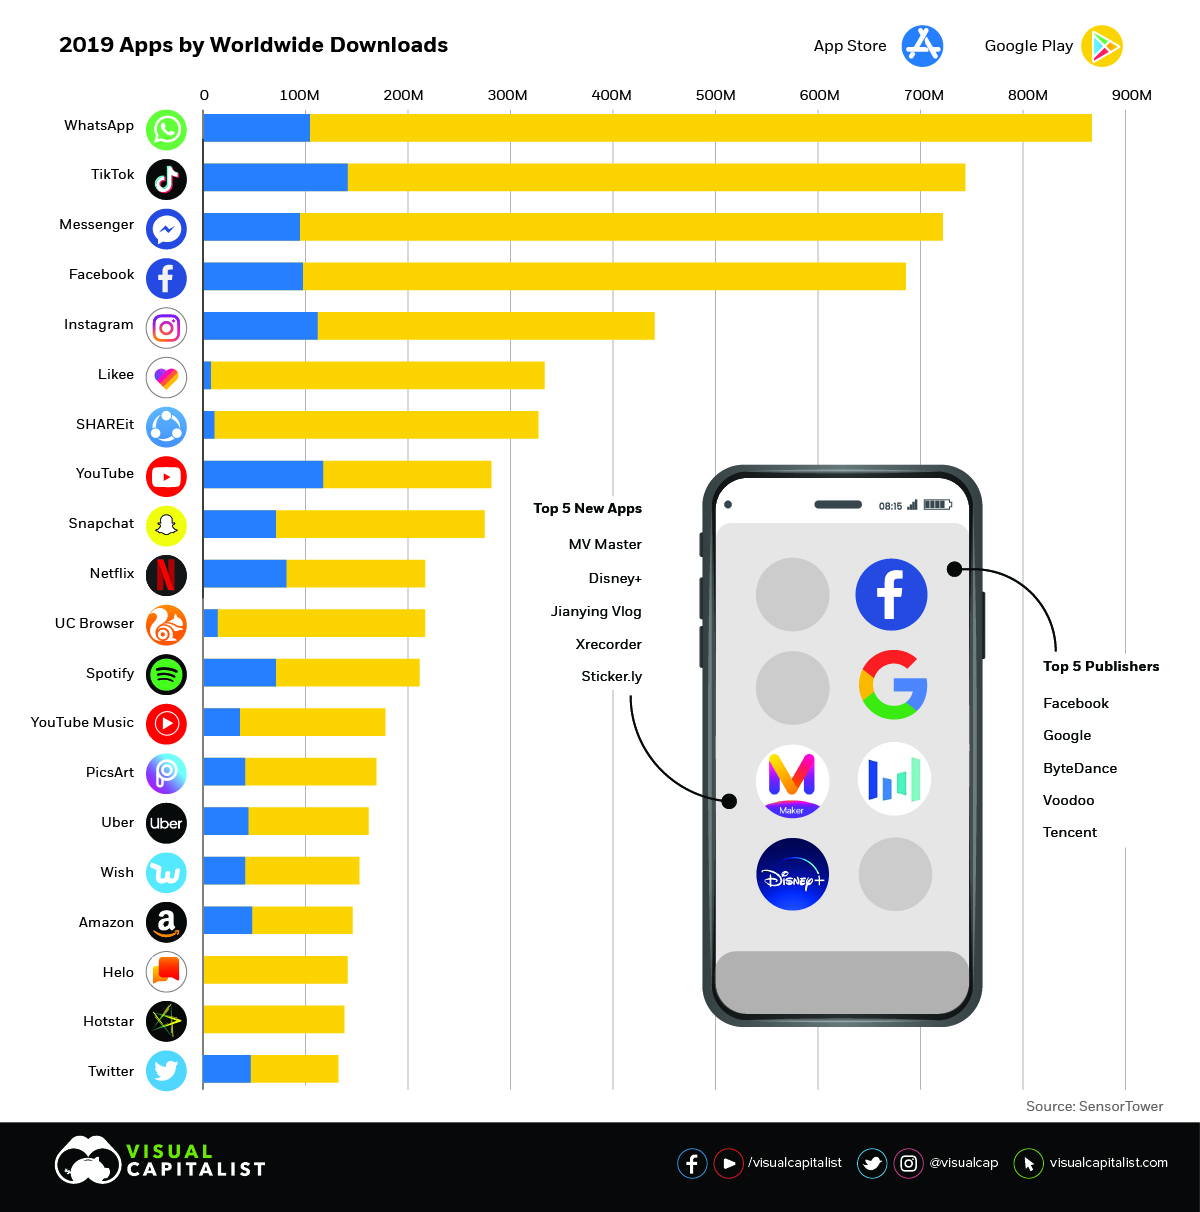 Ranked The World's Most Downloaded Apps in 2019